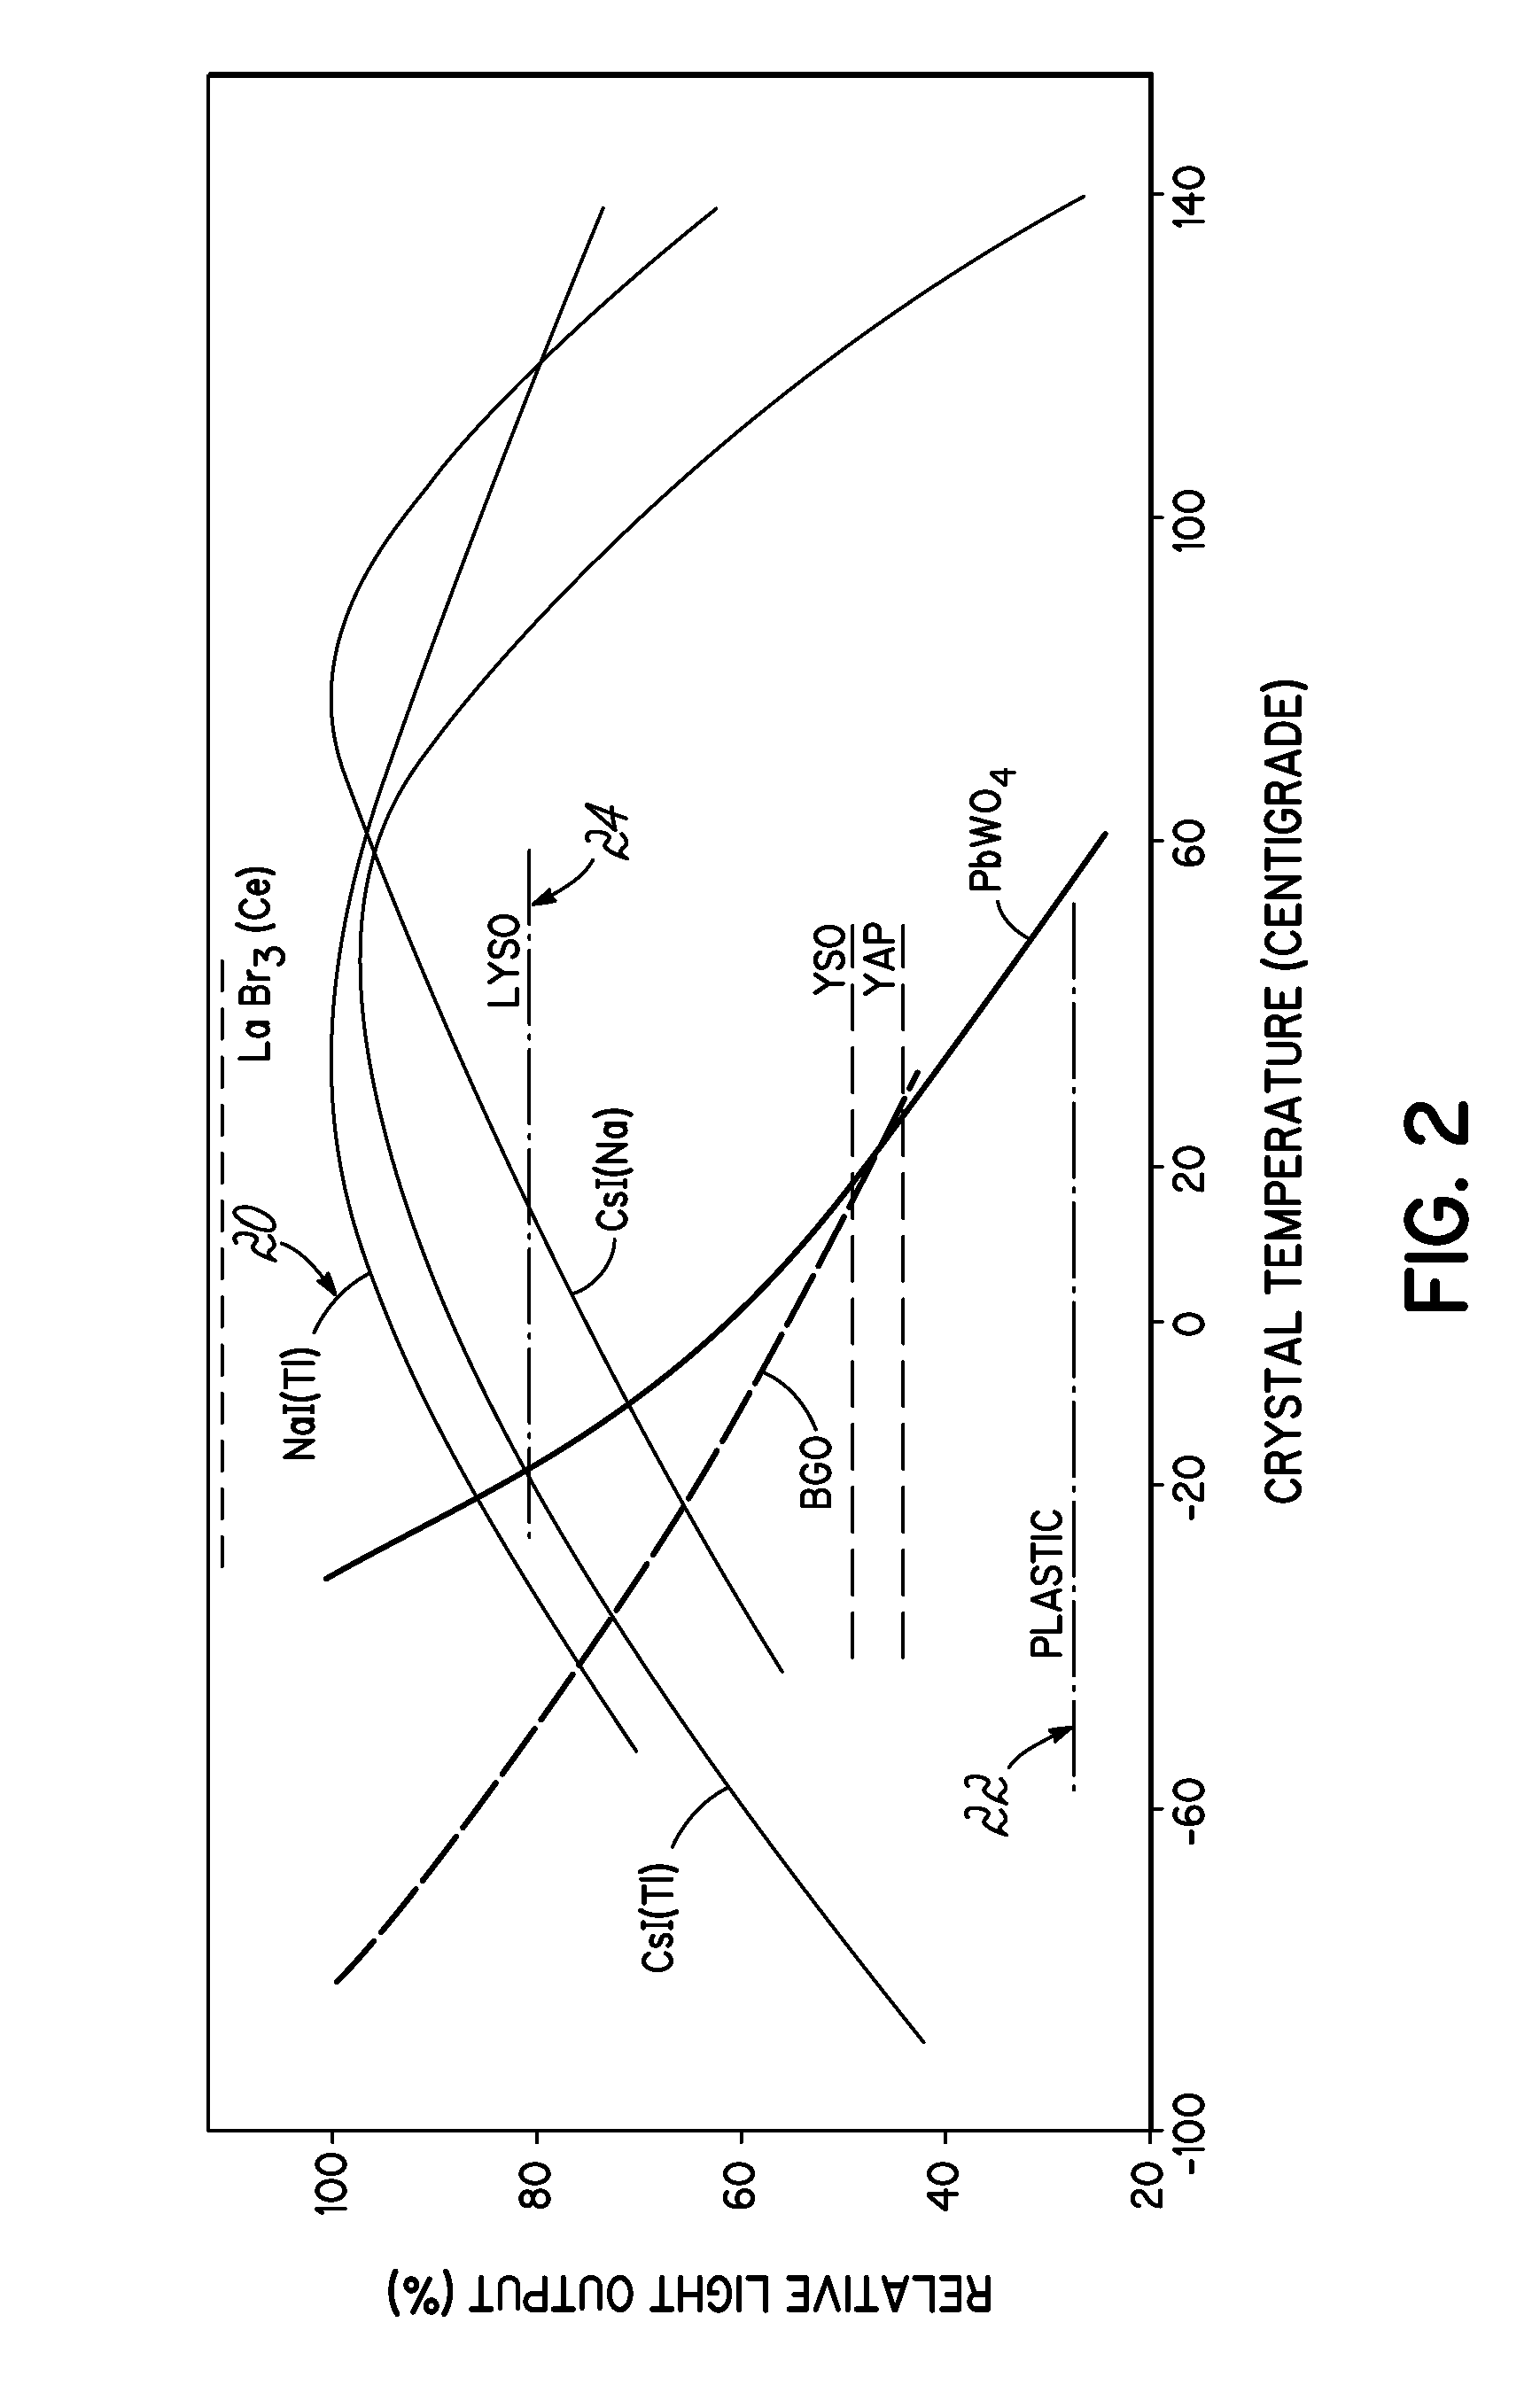 Automatic gain stabilization and temperature compensation for organic and/or plastic scintillation devices